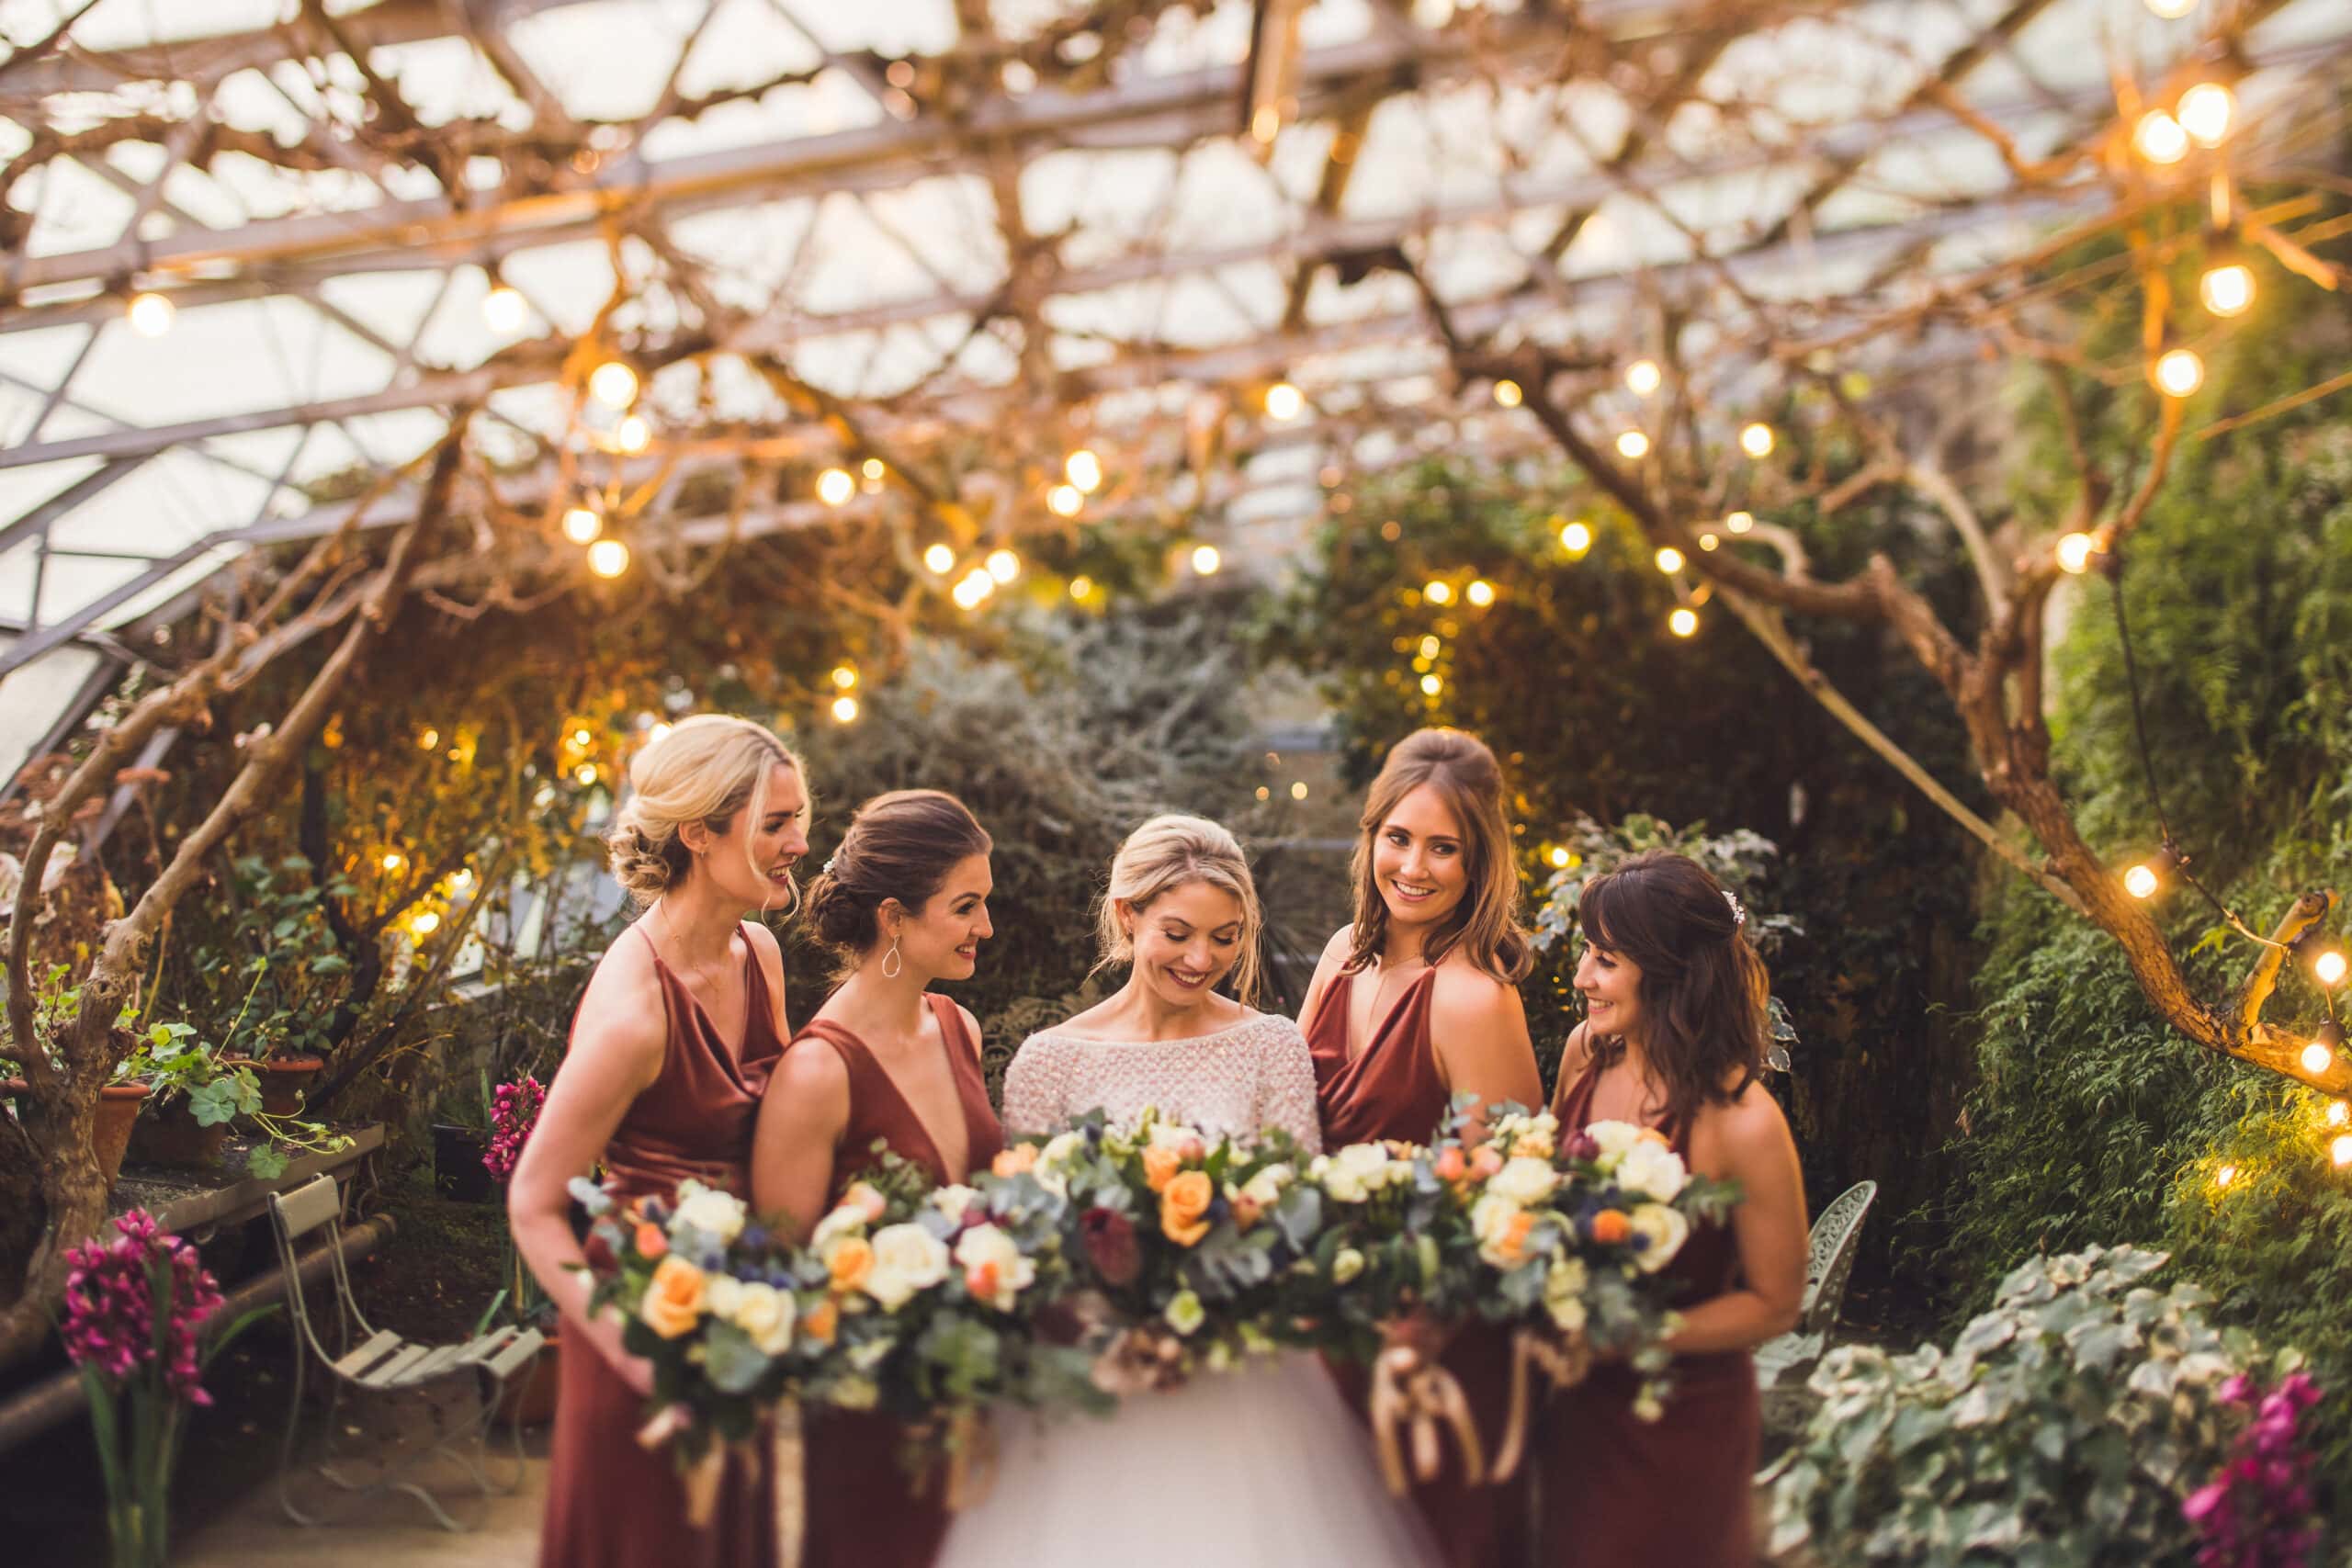 The bride and her bridesmaids pose in front of a greenhouse at Larchfield, one of the stunning Wedding Venues in Northern Ireland.